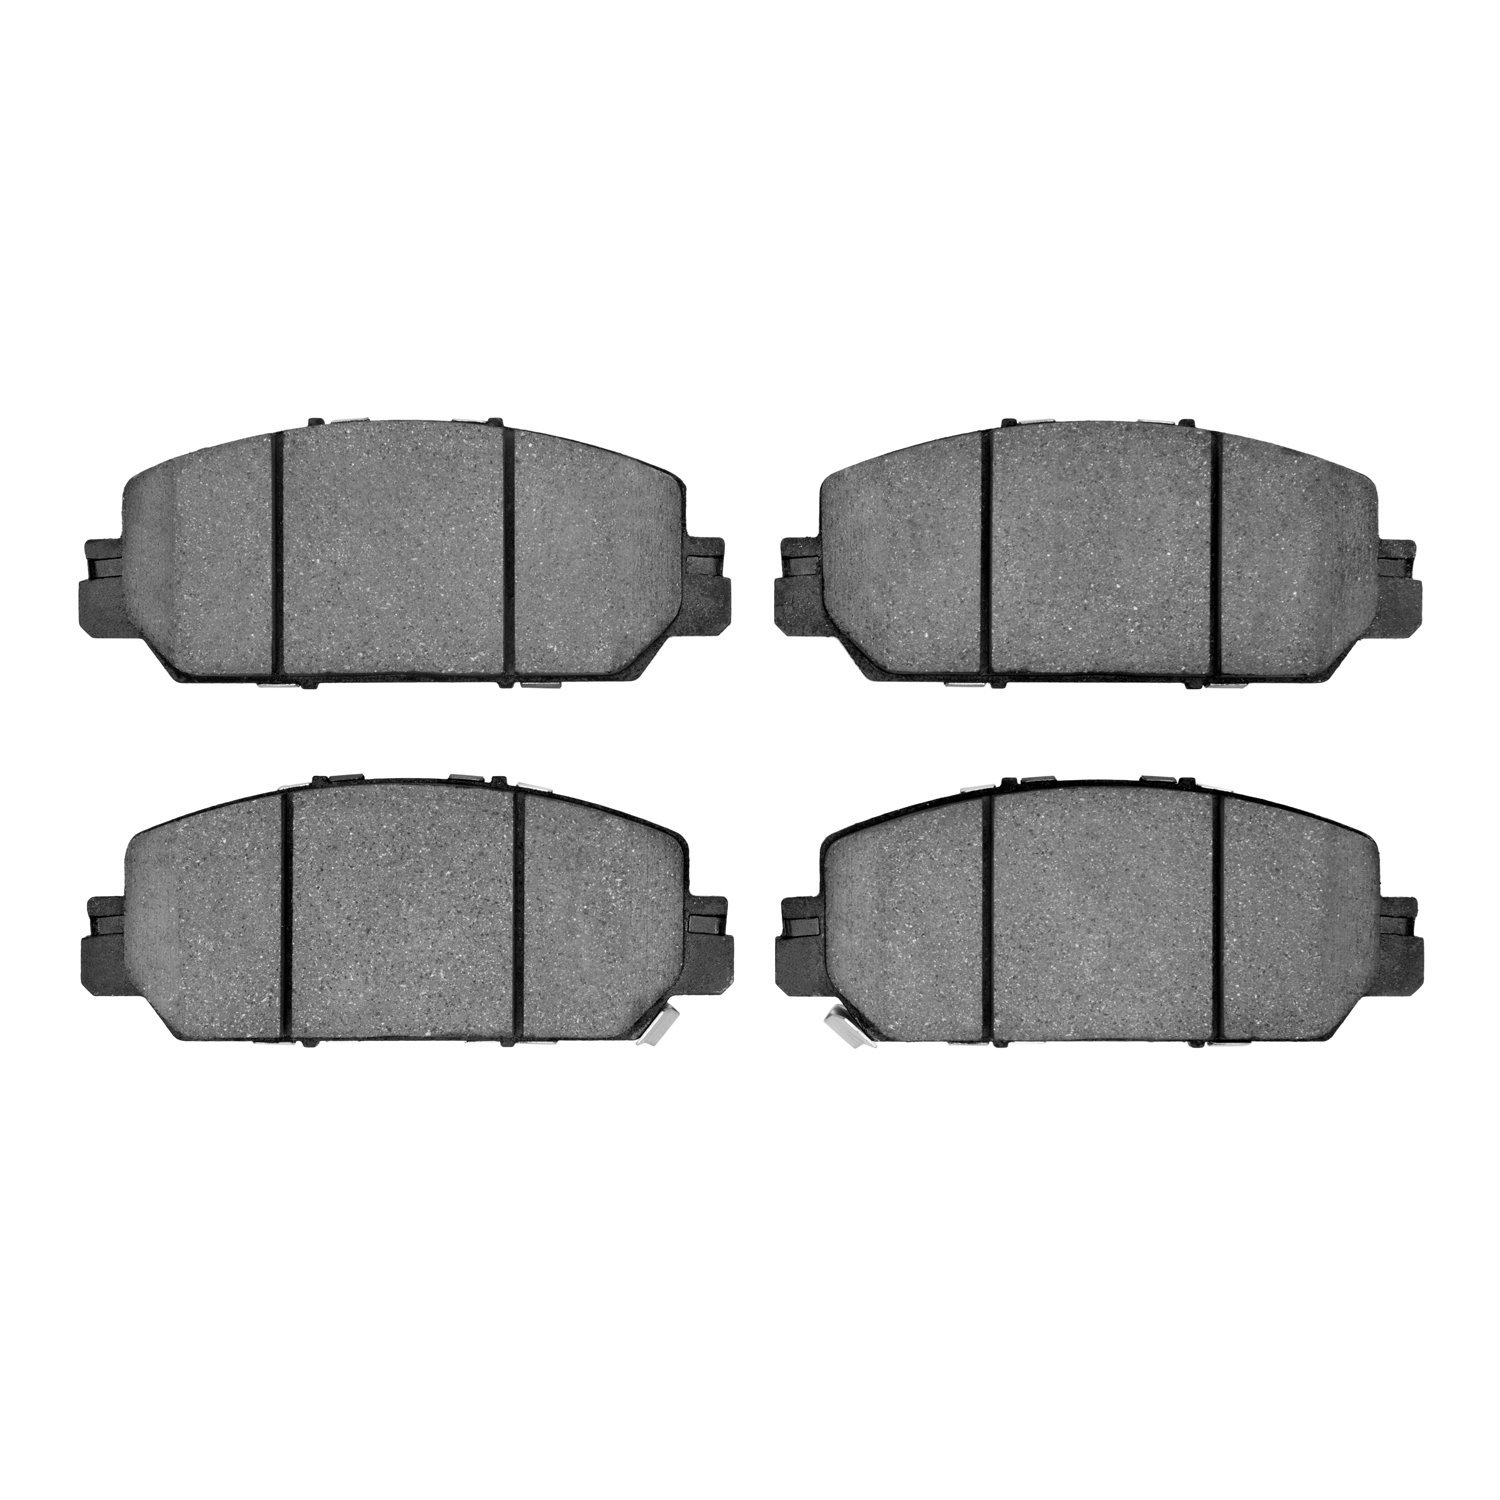 1551-2036-00 5000 Advanced Ceramic Brake Pads, Fits Select Acura/Honda, Position: Front